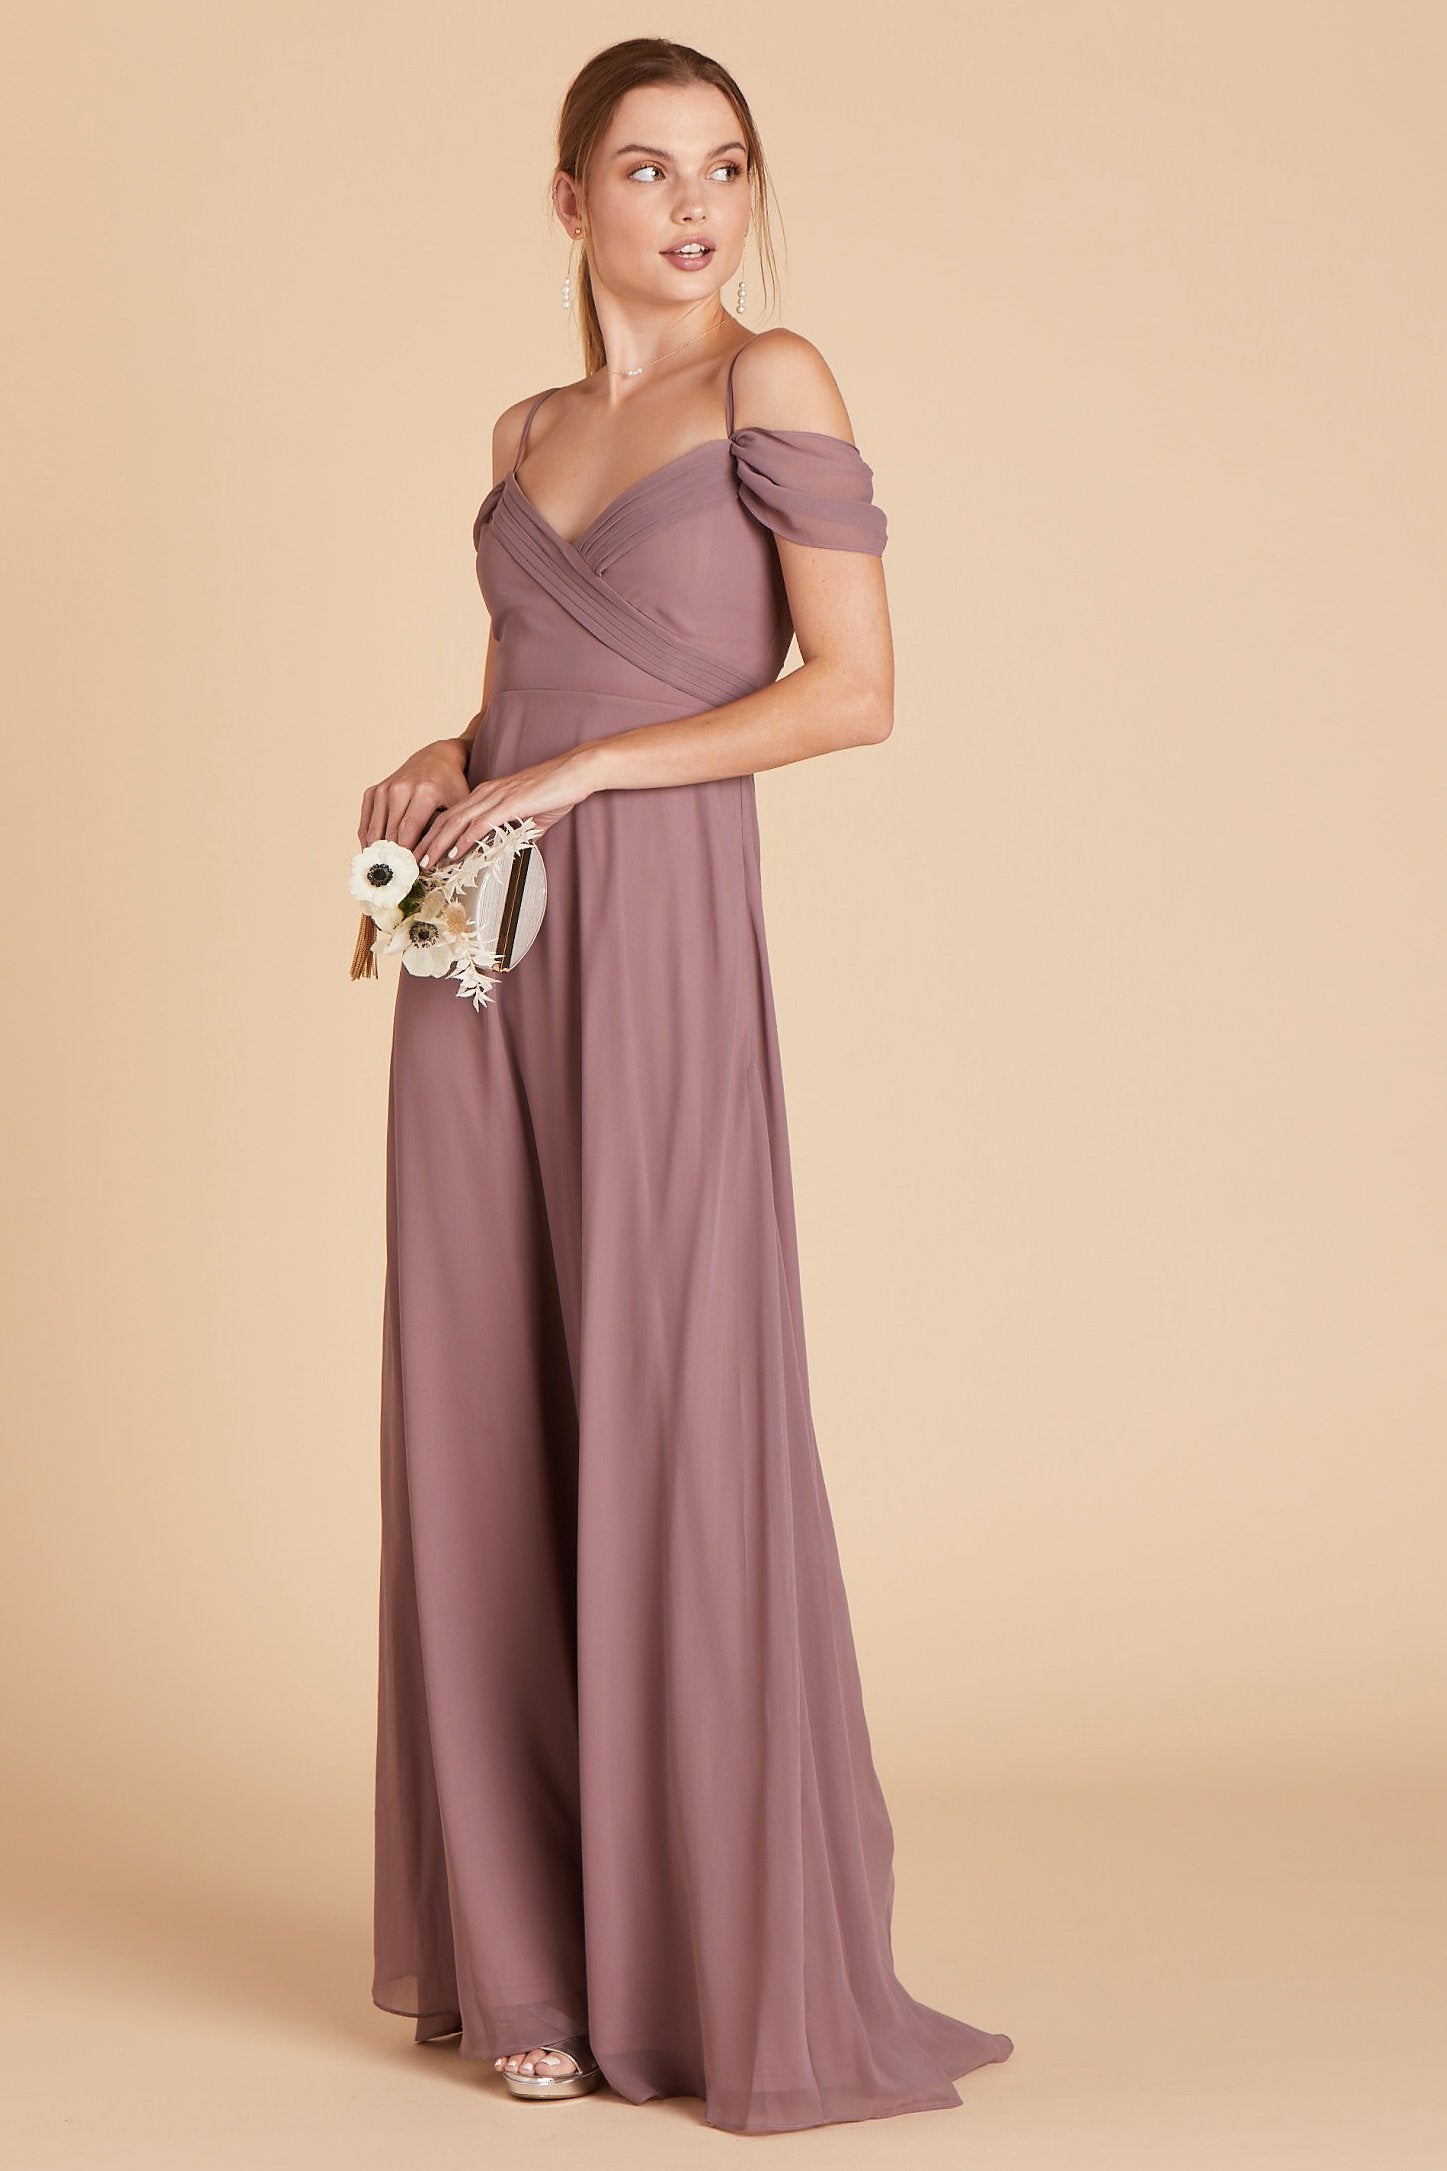 Spence convertible bridesmaid dress in dark mauve chiffon by Birdy Grey, side view